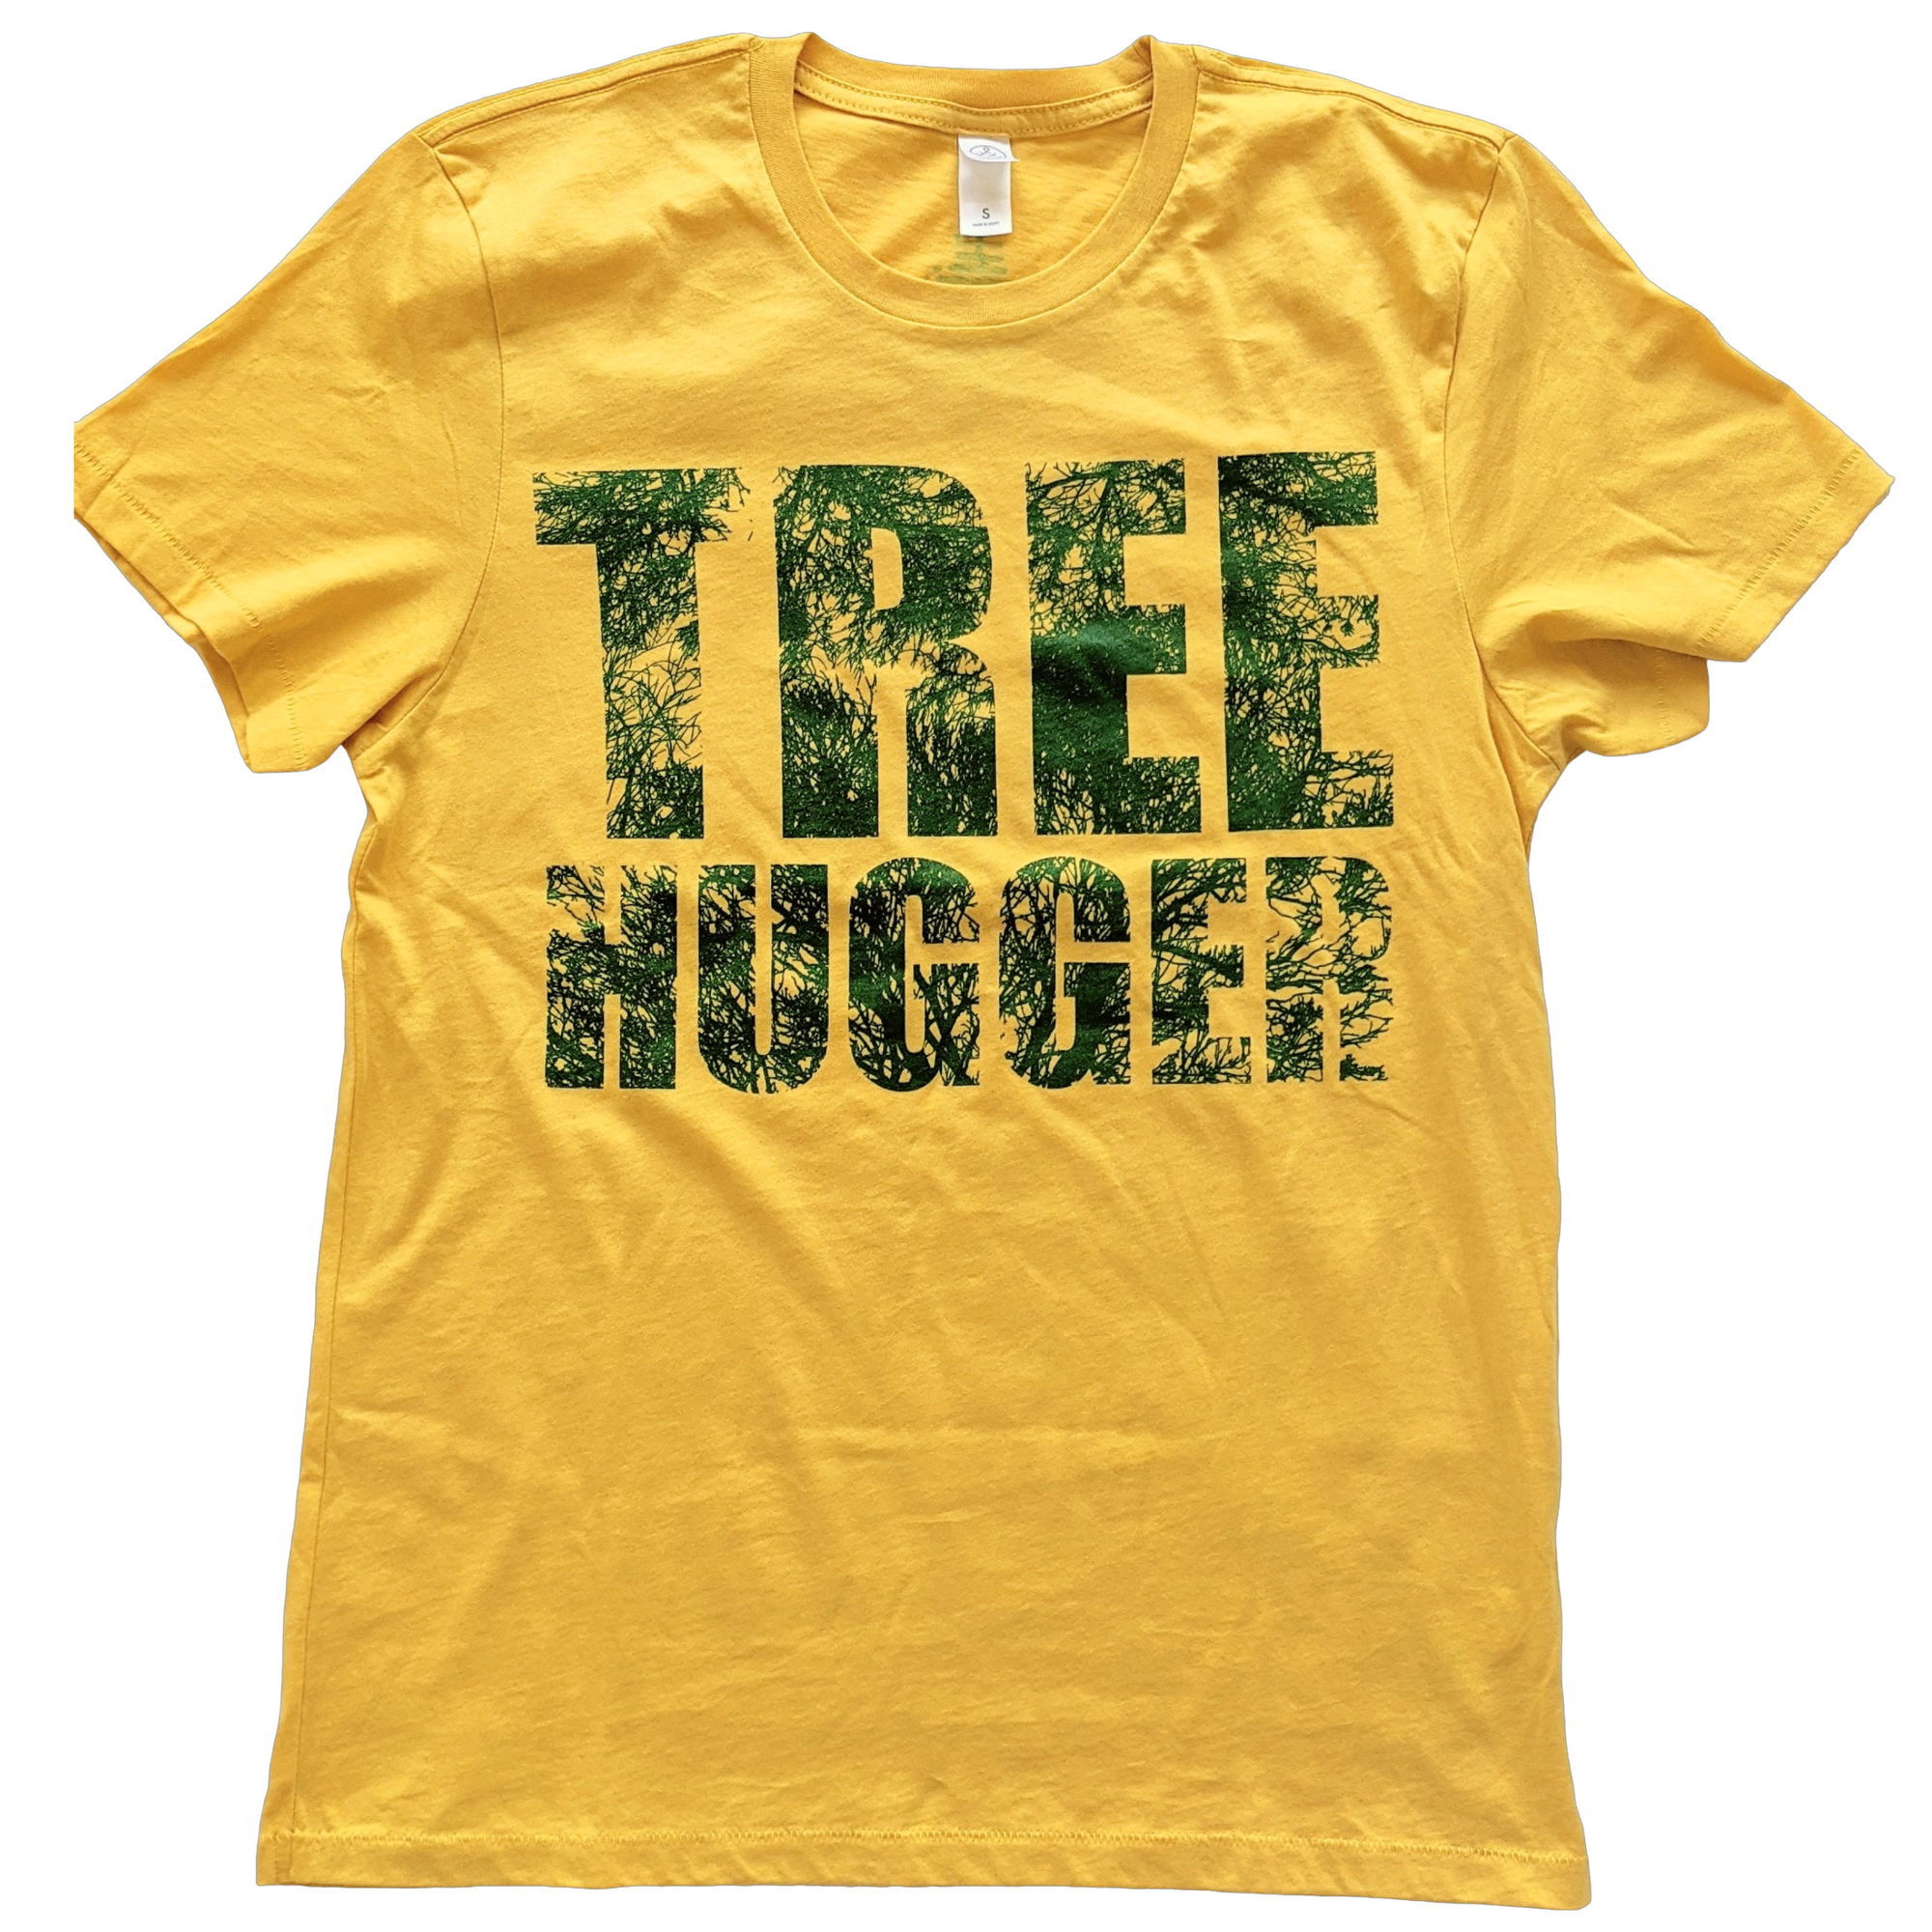 Are You a Tree Hugger? We Are Too, Shop Our Tree Loving, Eco-Friendly Store Today at Green Hive Collective